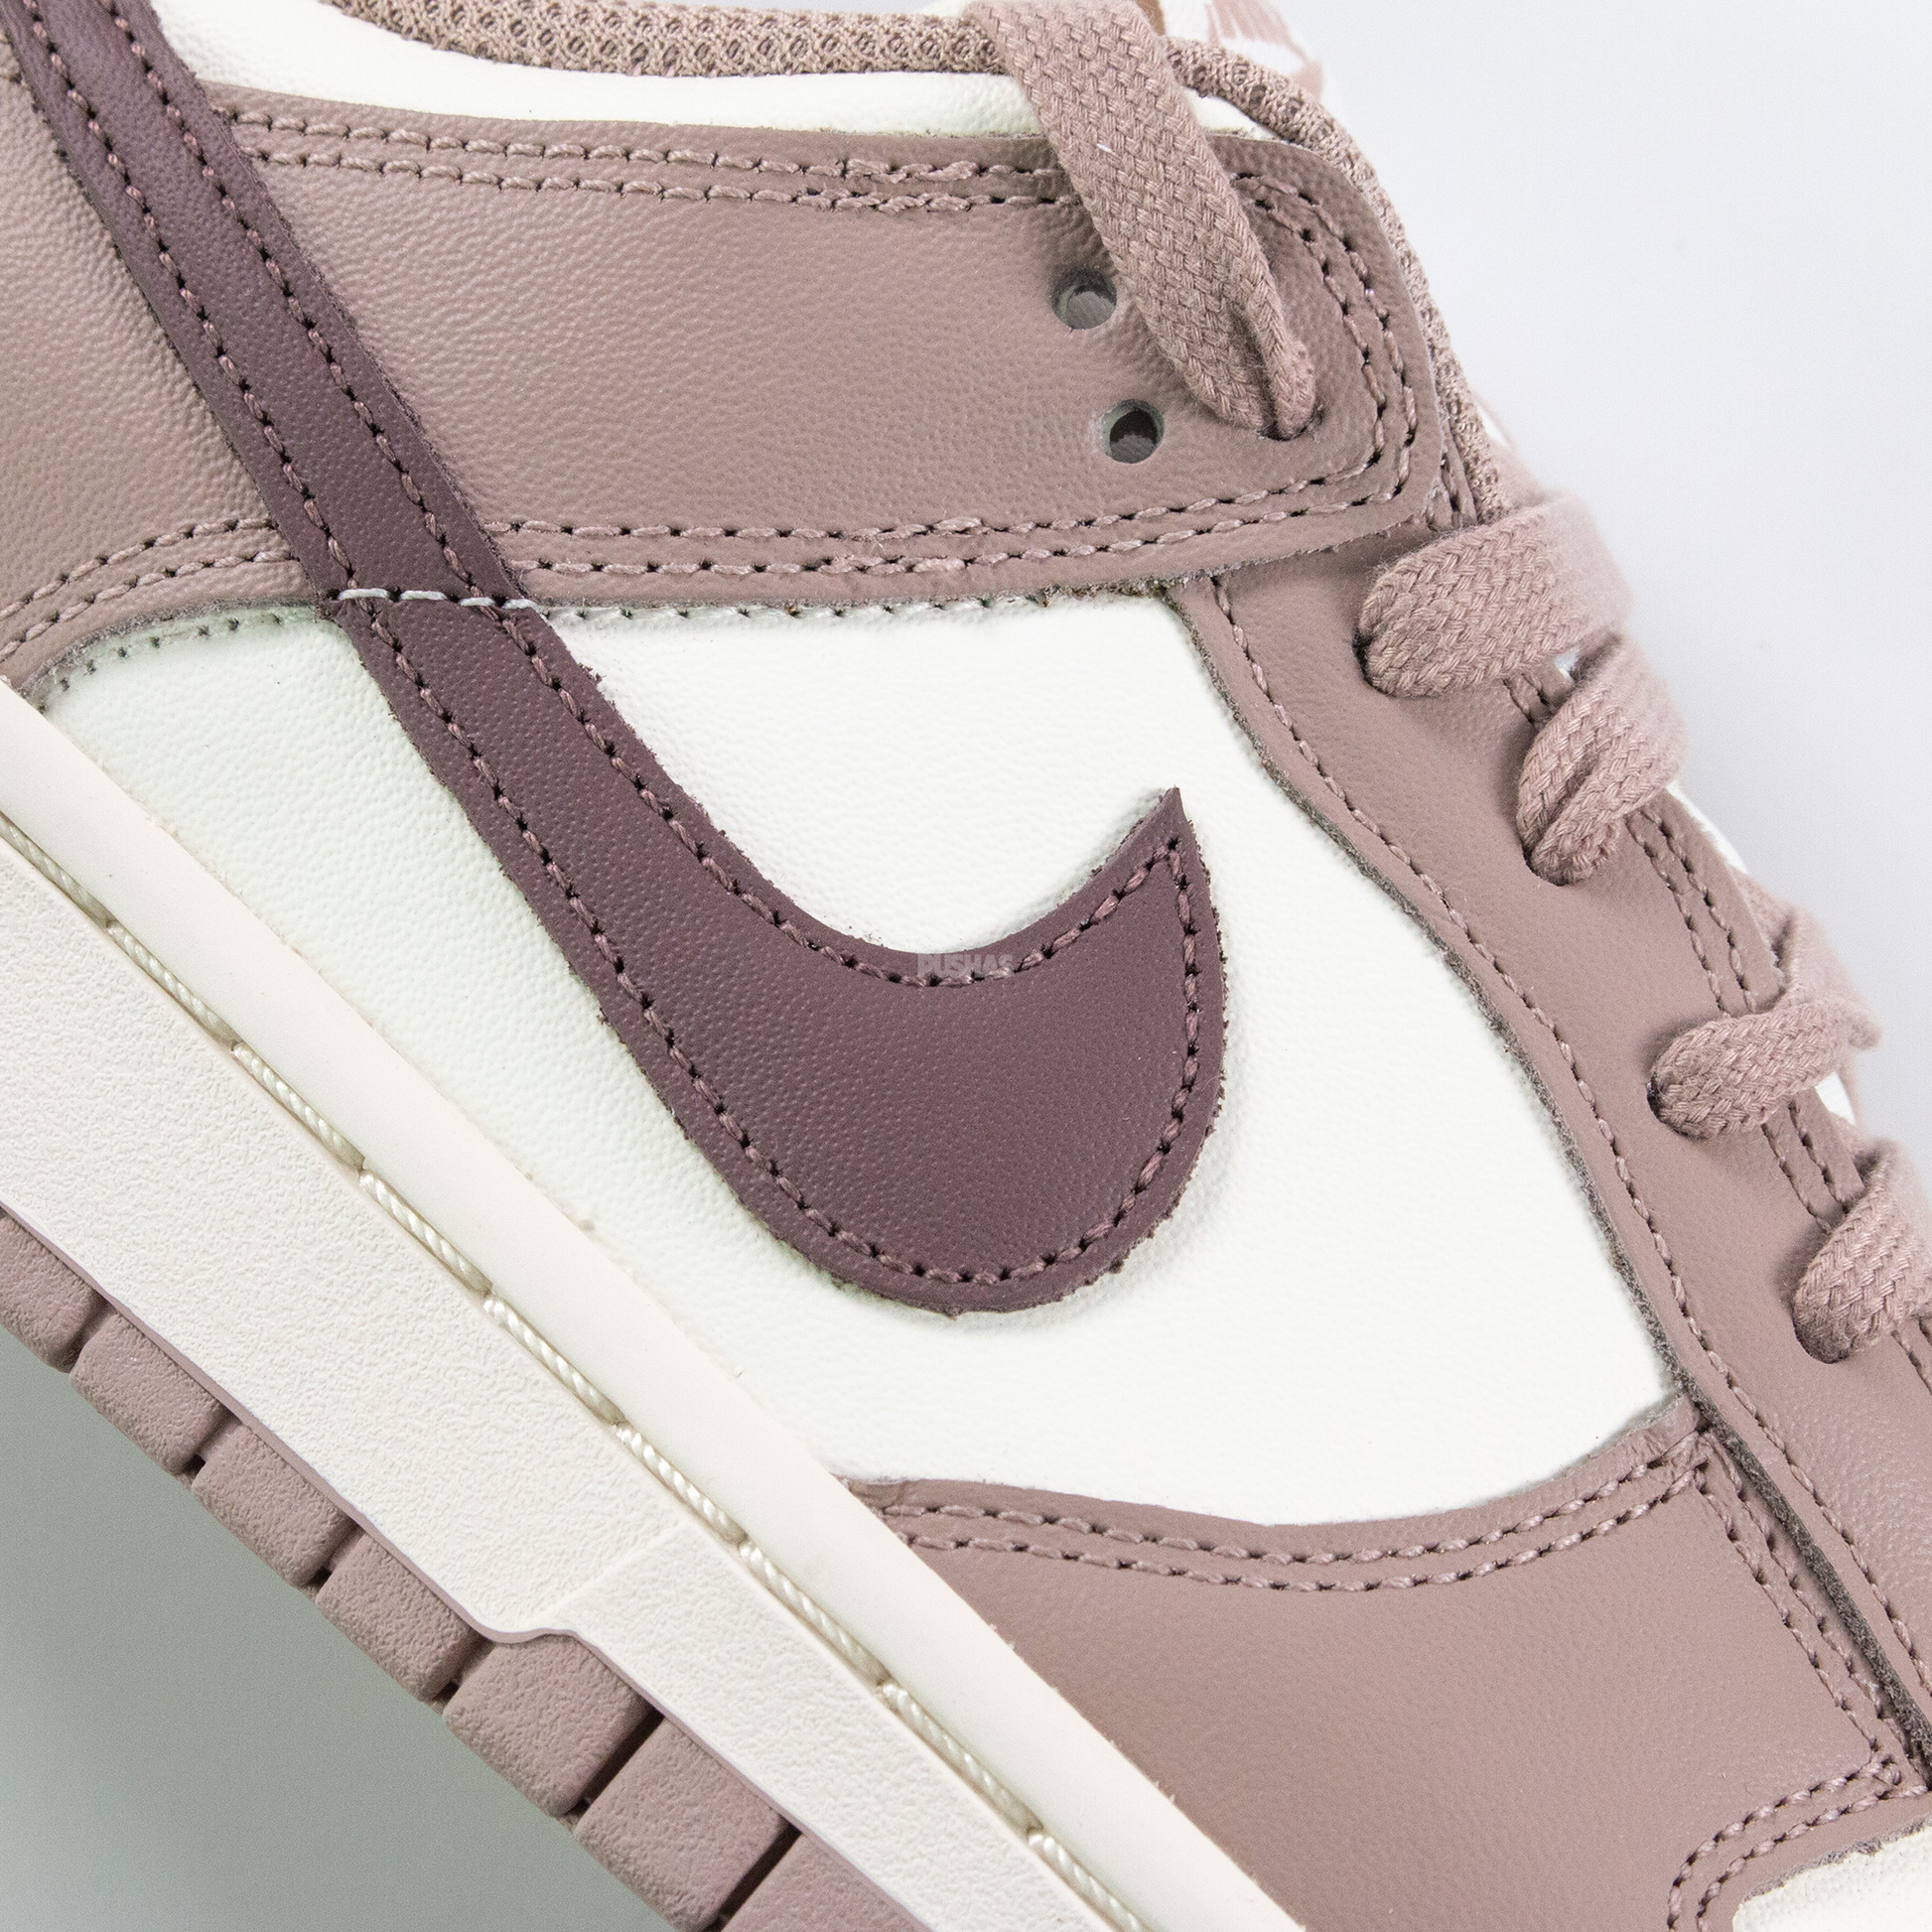 Nike-Dunk-Low-Diffused-Taupe-Womens-2023